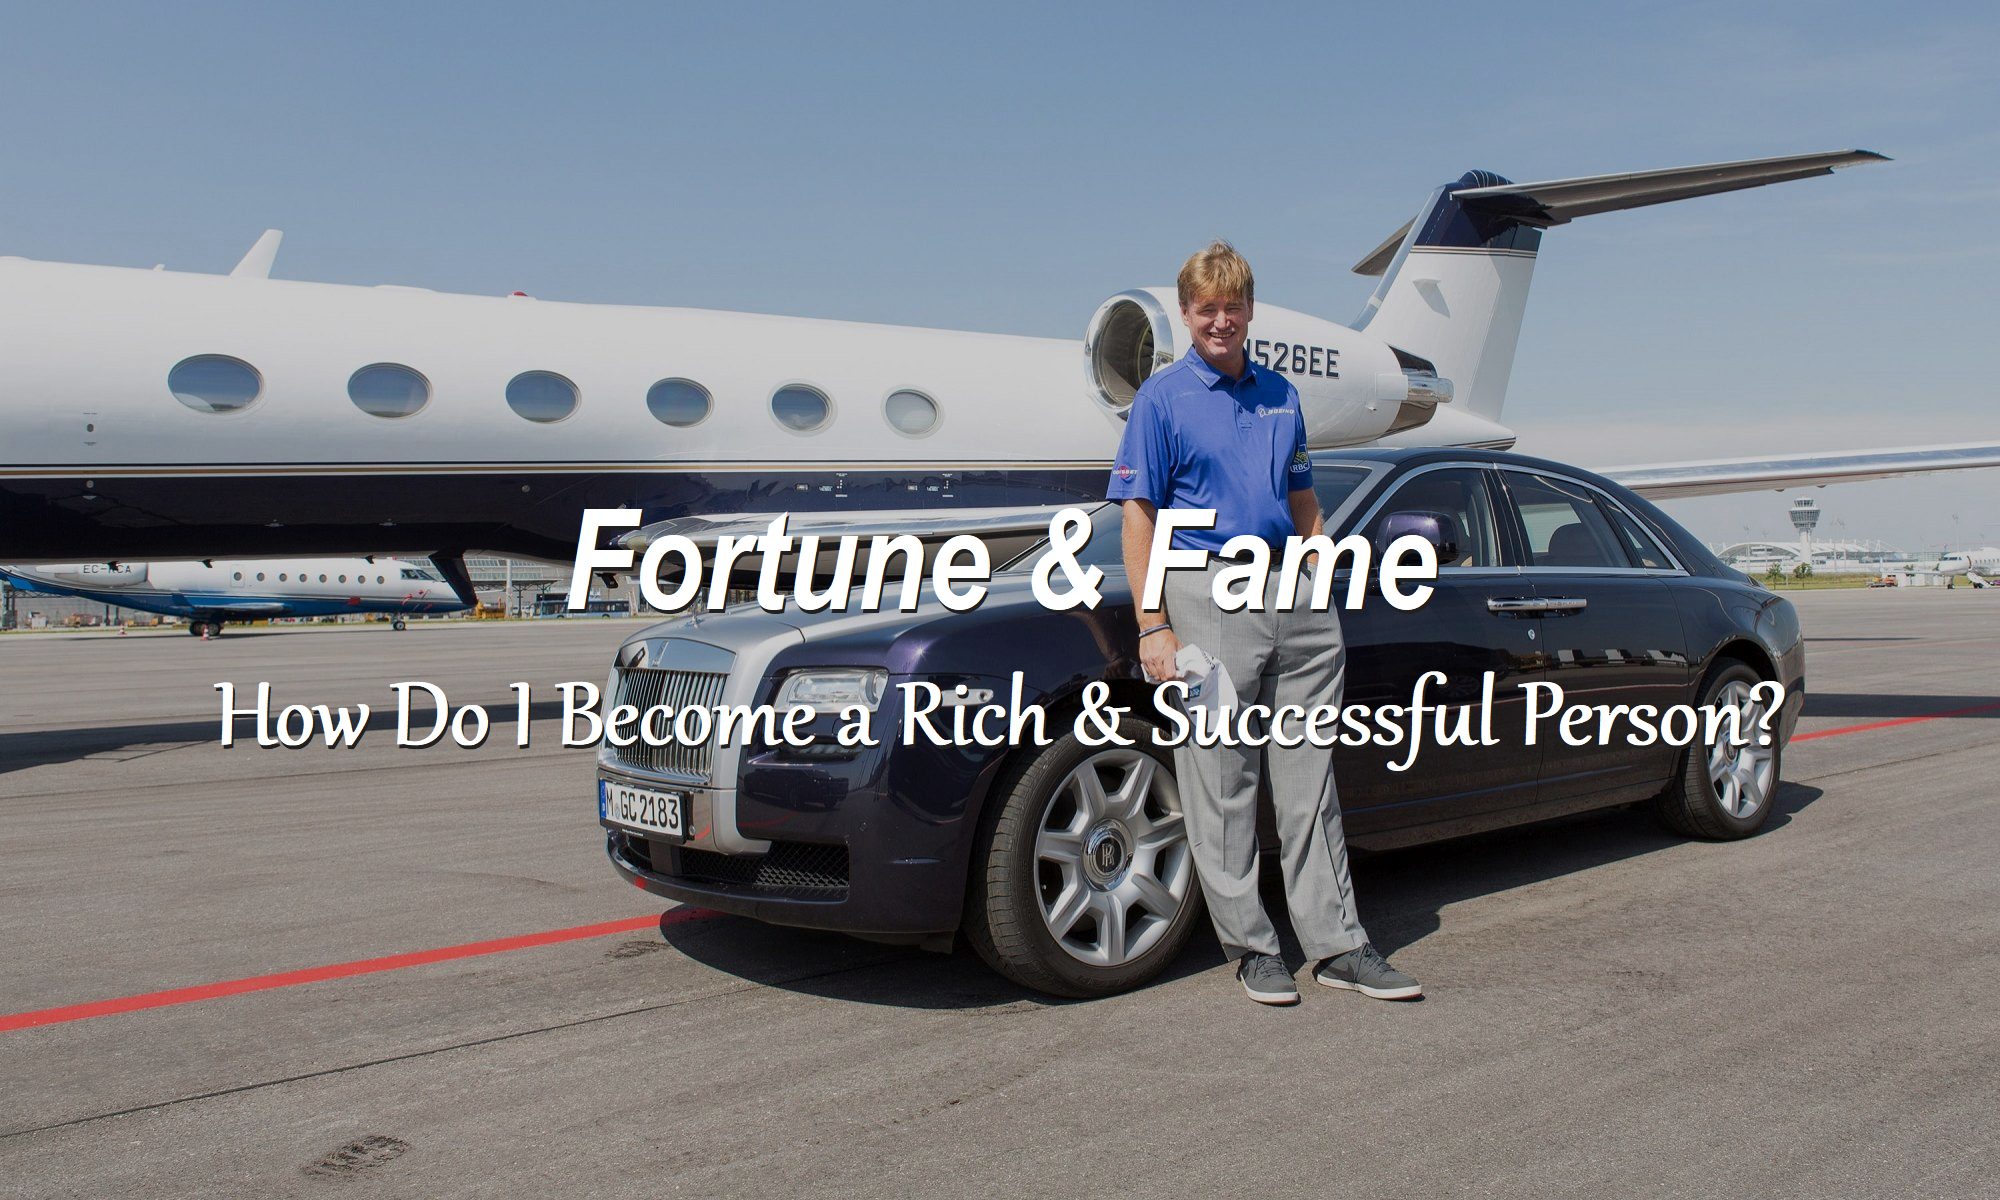 MANIFEST MONEY, FAME & FORTUNE! How to Become a Rich & Famous Person